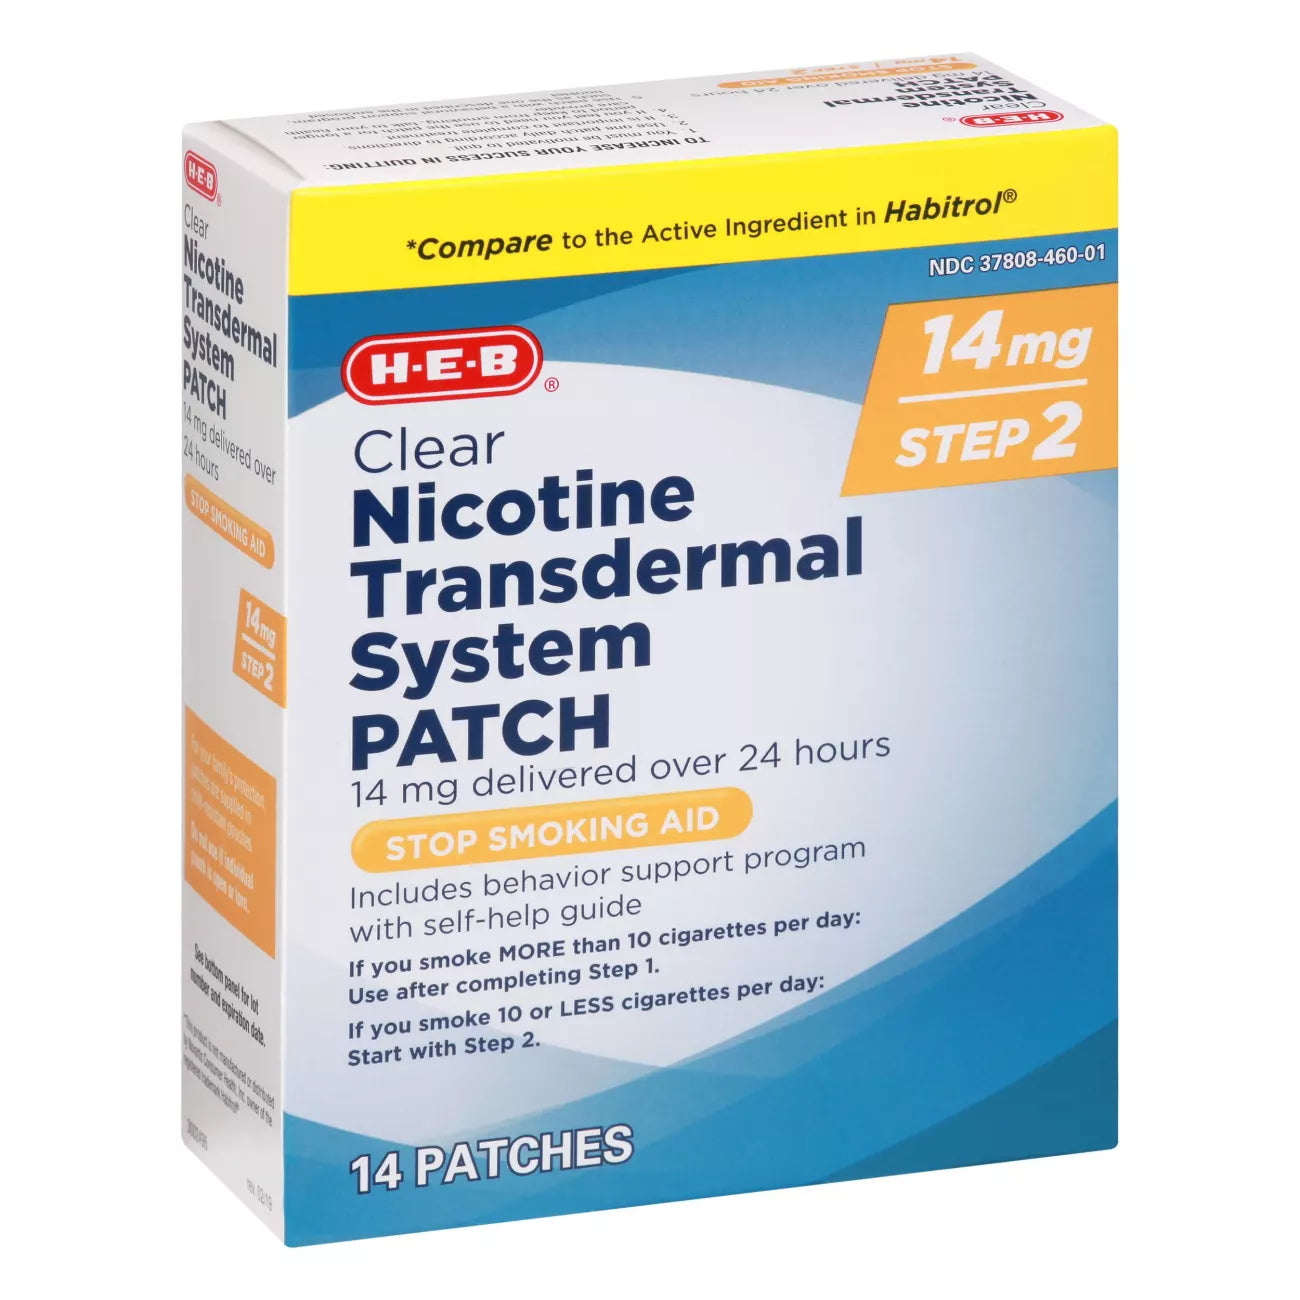 H‑E‑B HEB Clear Nicotine Transdermal System step 2 Patch - 14 mg